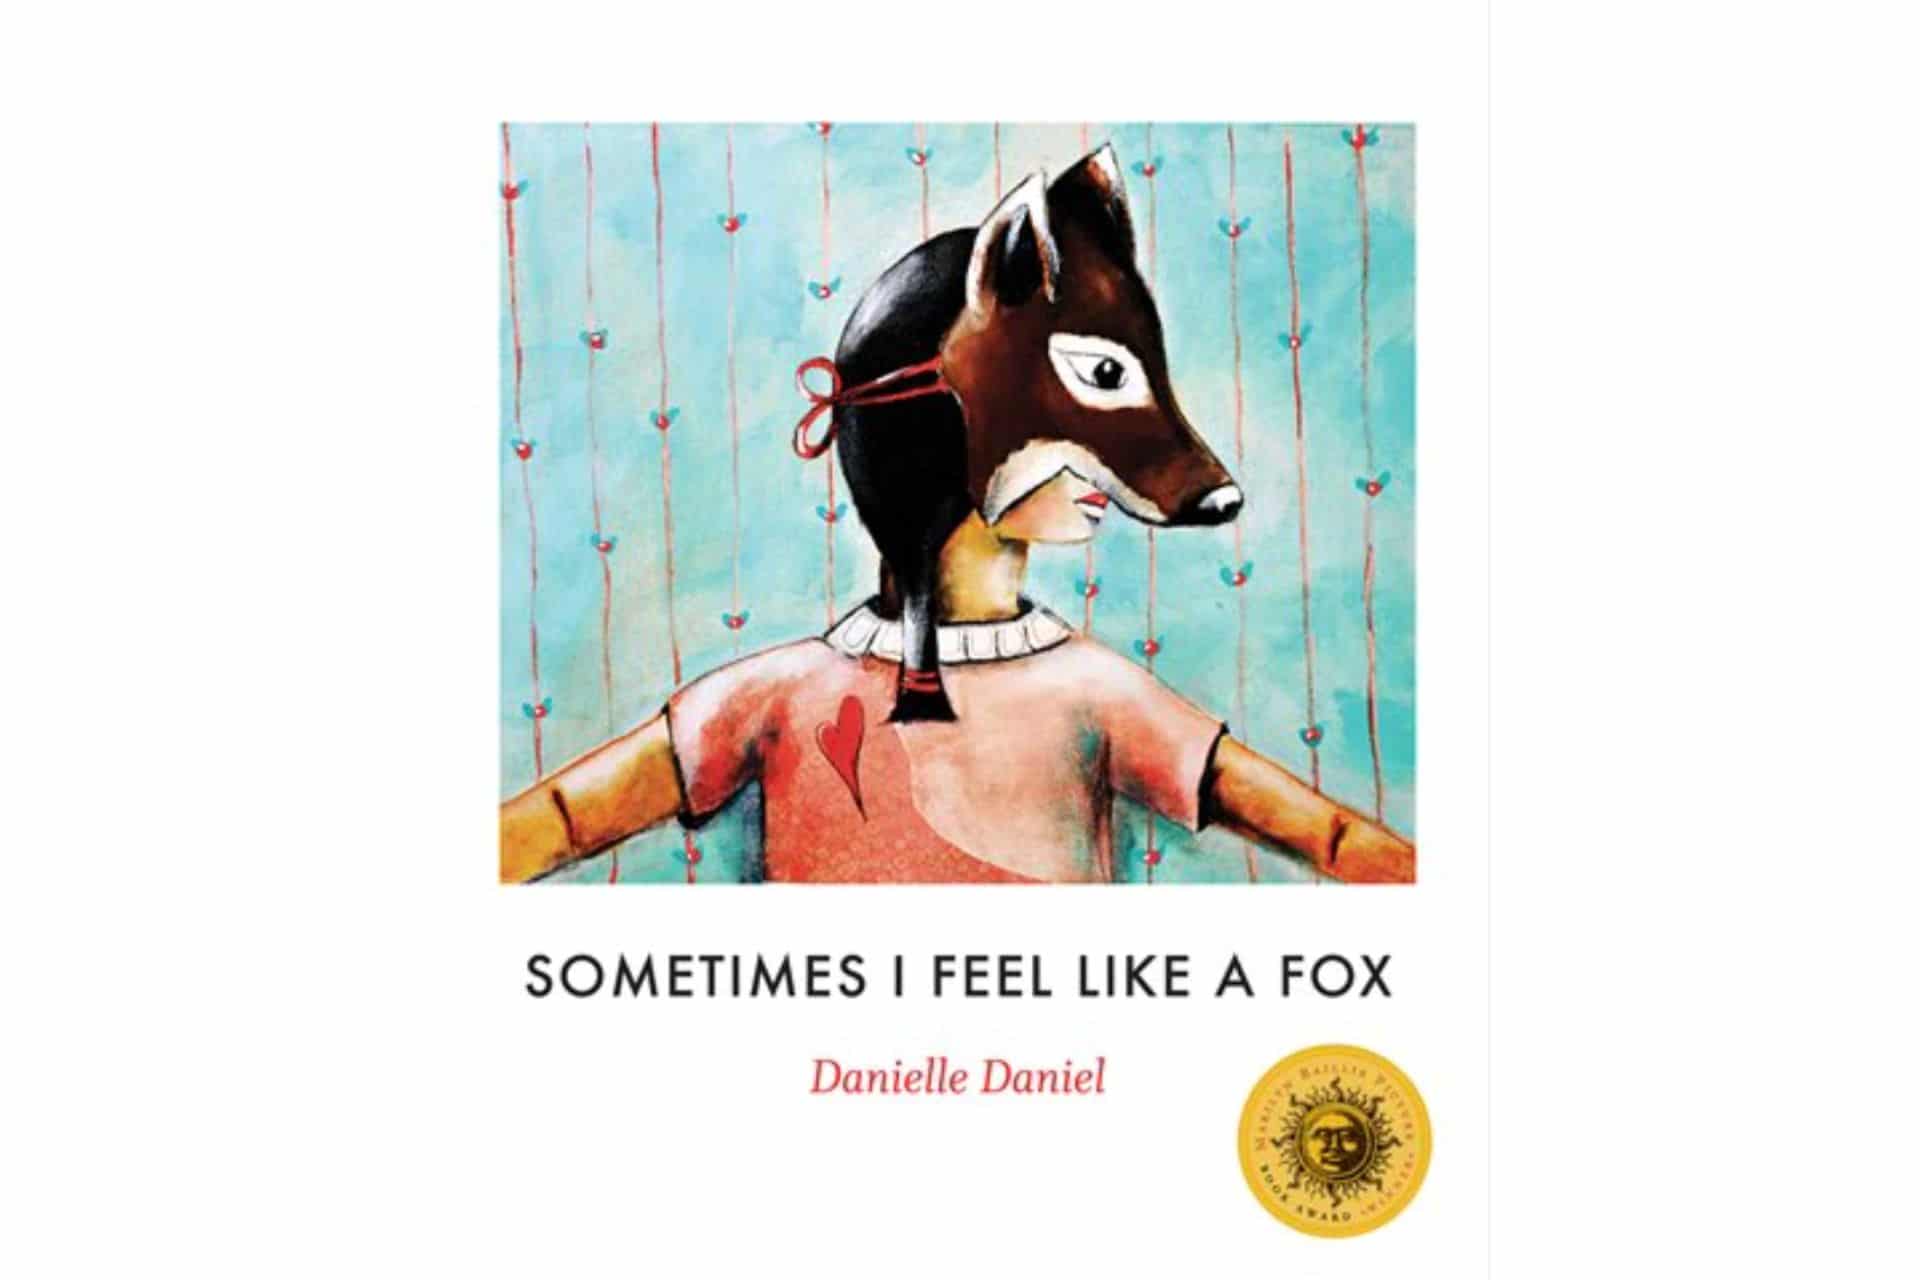 Indigenous feellikeafox 1920x1280 1 - 10 amazing indigenous children's books to add to your child's library